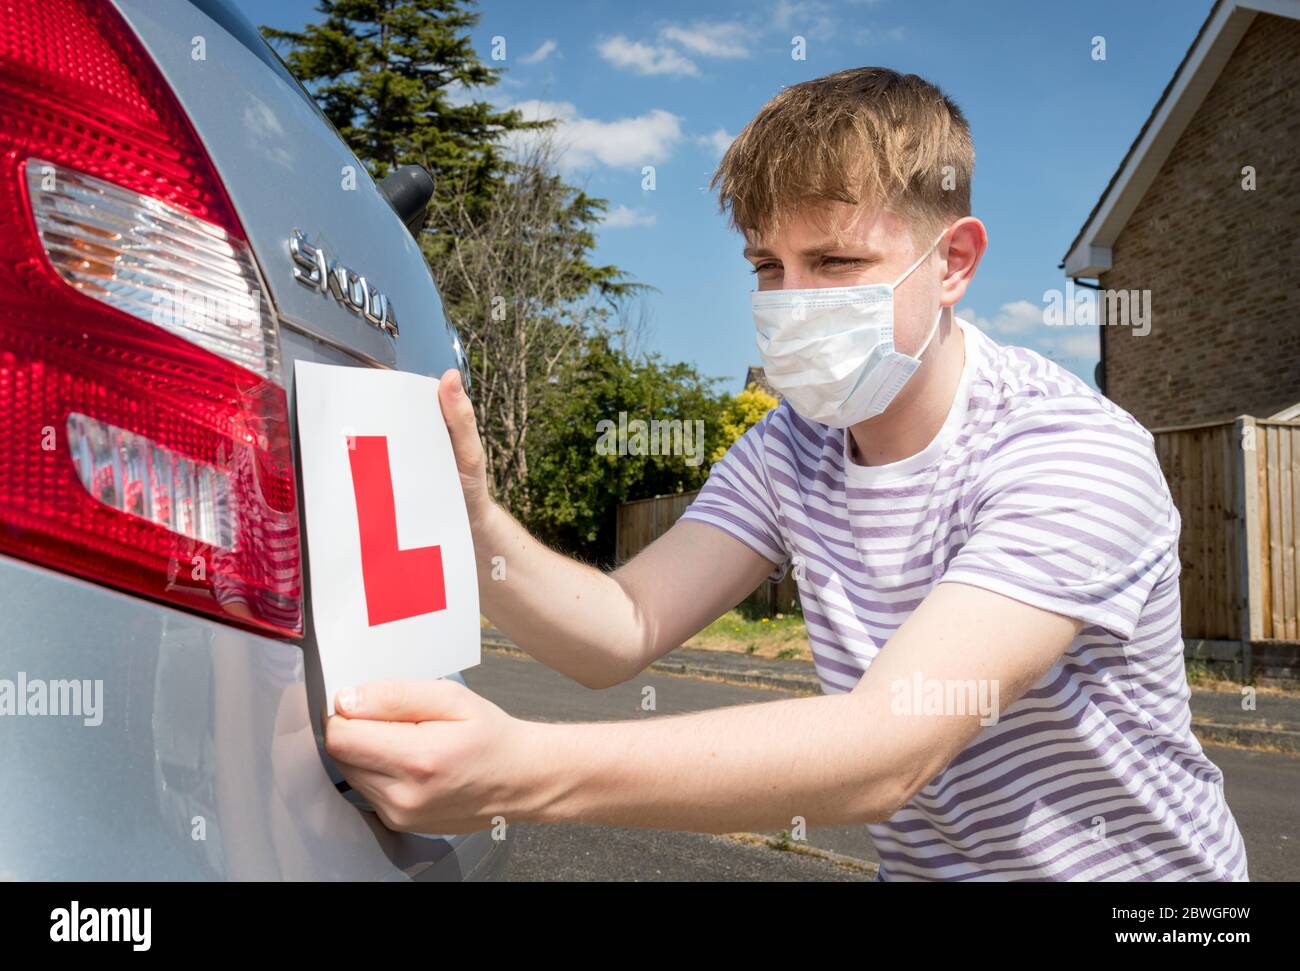 Teenage learner driver a wearing a face mask due to the coronavirus pandemic waiting to start his driving lesson. Stock Photo